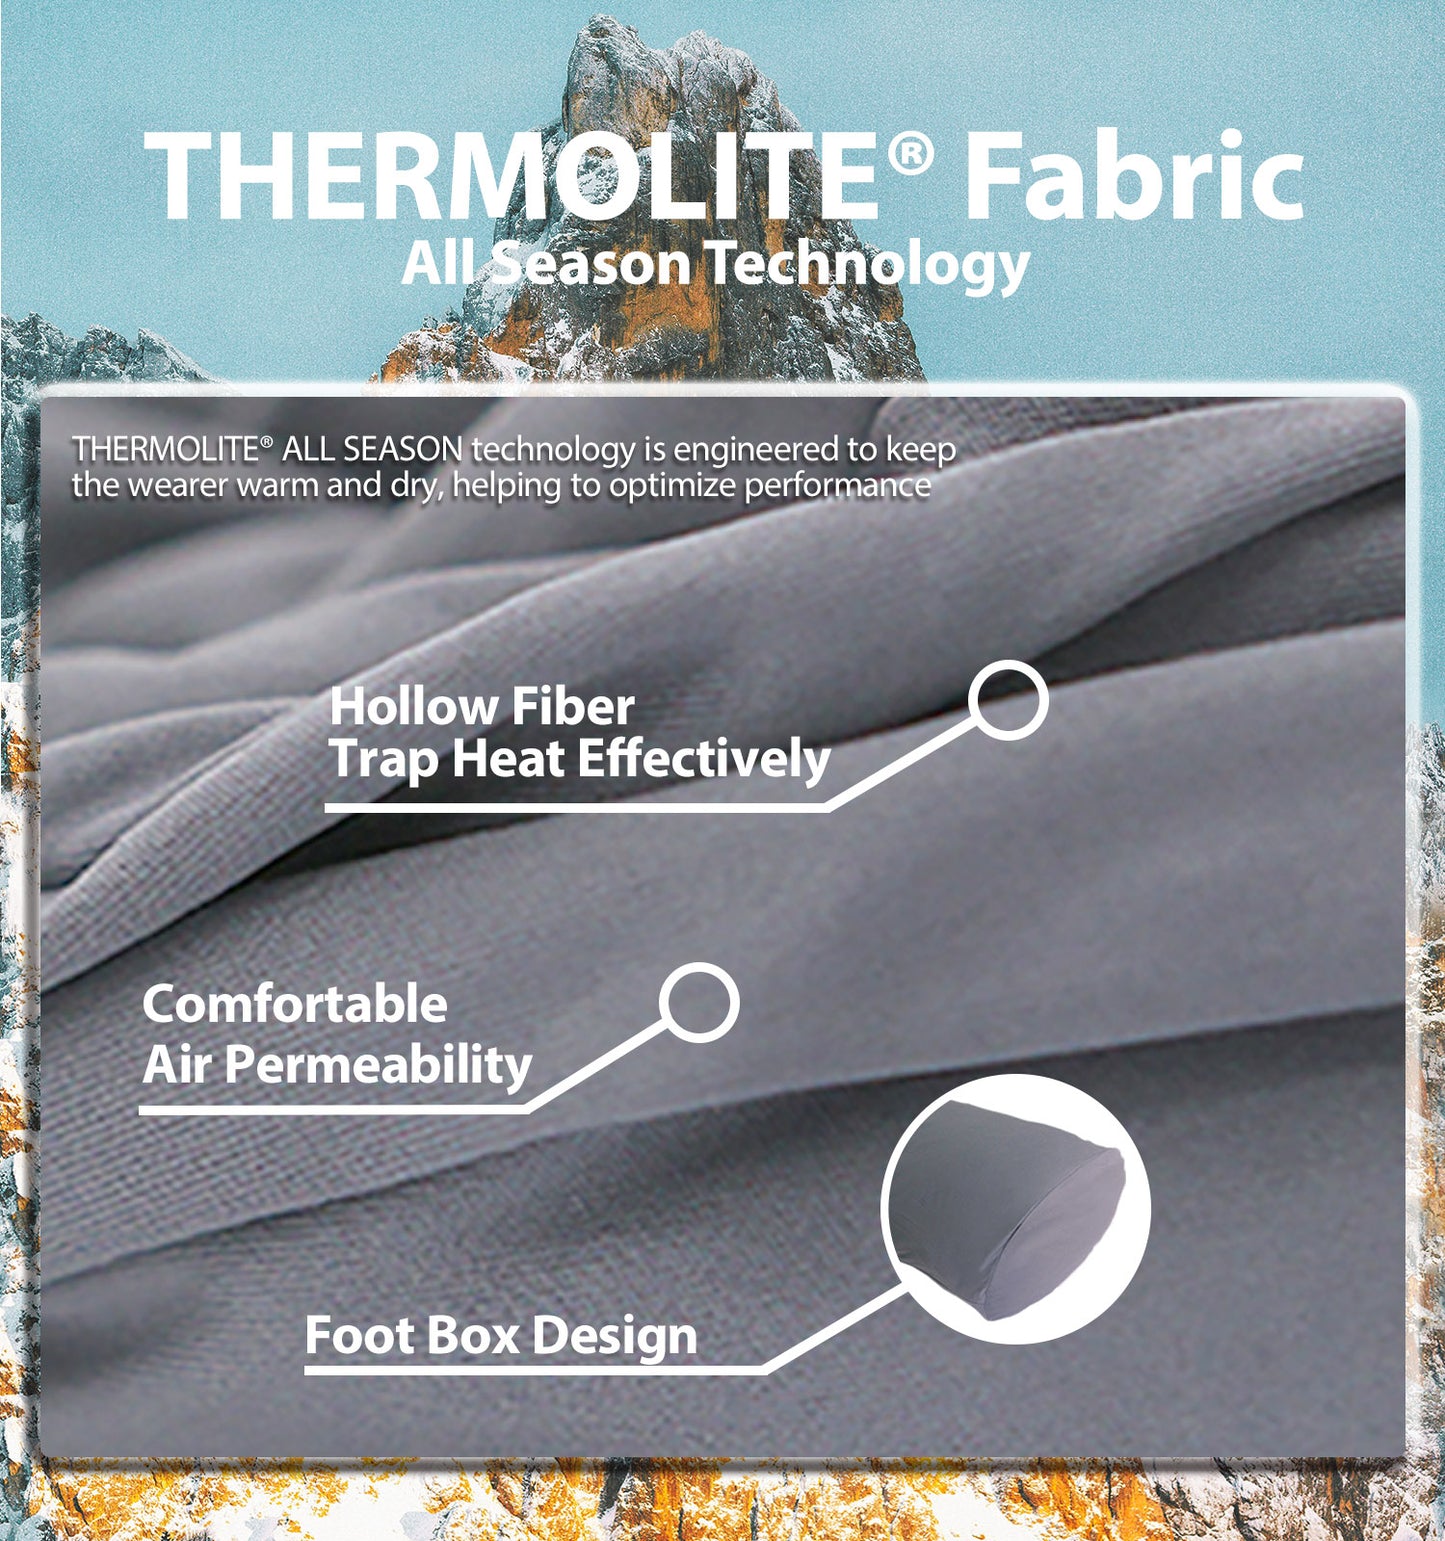 litume E626 Thermolite All Season Sleeping Bag Liner Add Up to 22F 12C Litume four season technology cold weather lightweight compact portable with zipper zipped half zip small size winter hiking camping backpacking backpacker travel hotel train airplane hostal ykkk zipper drawstring hood hooded footbox